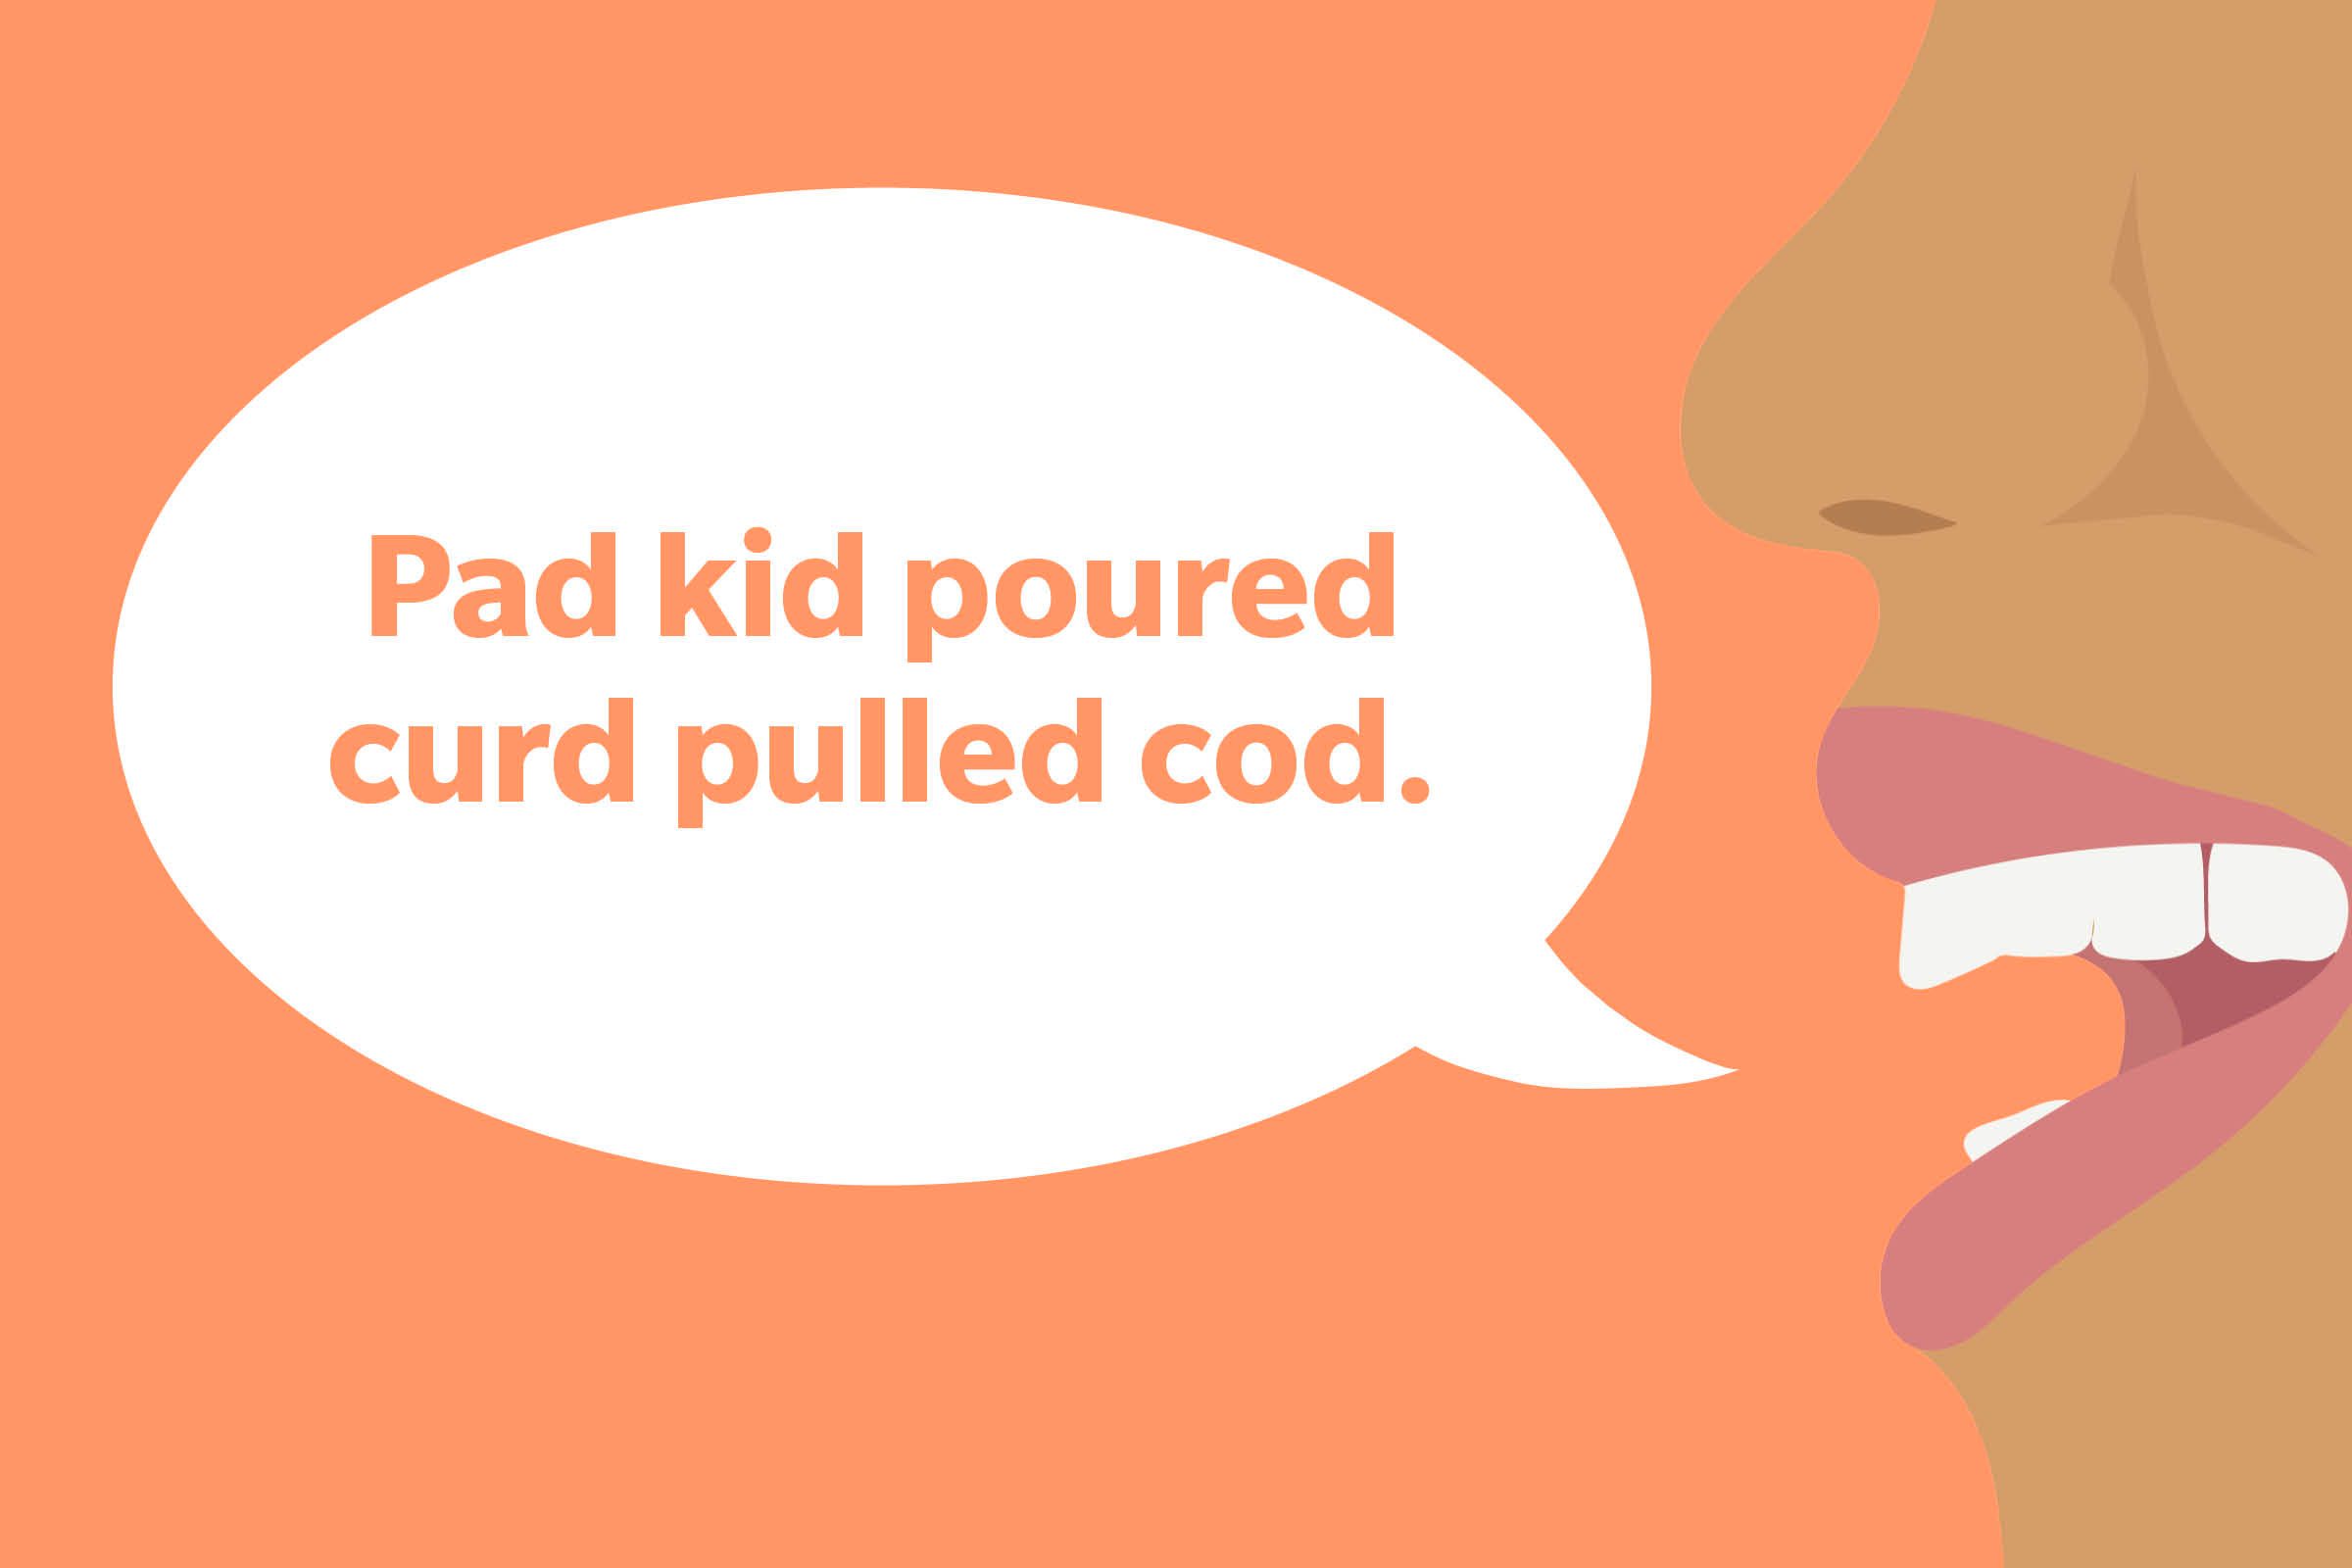 Tongue Twister: Pad kid poured curd pulled cod